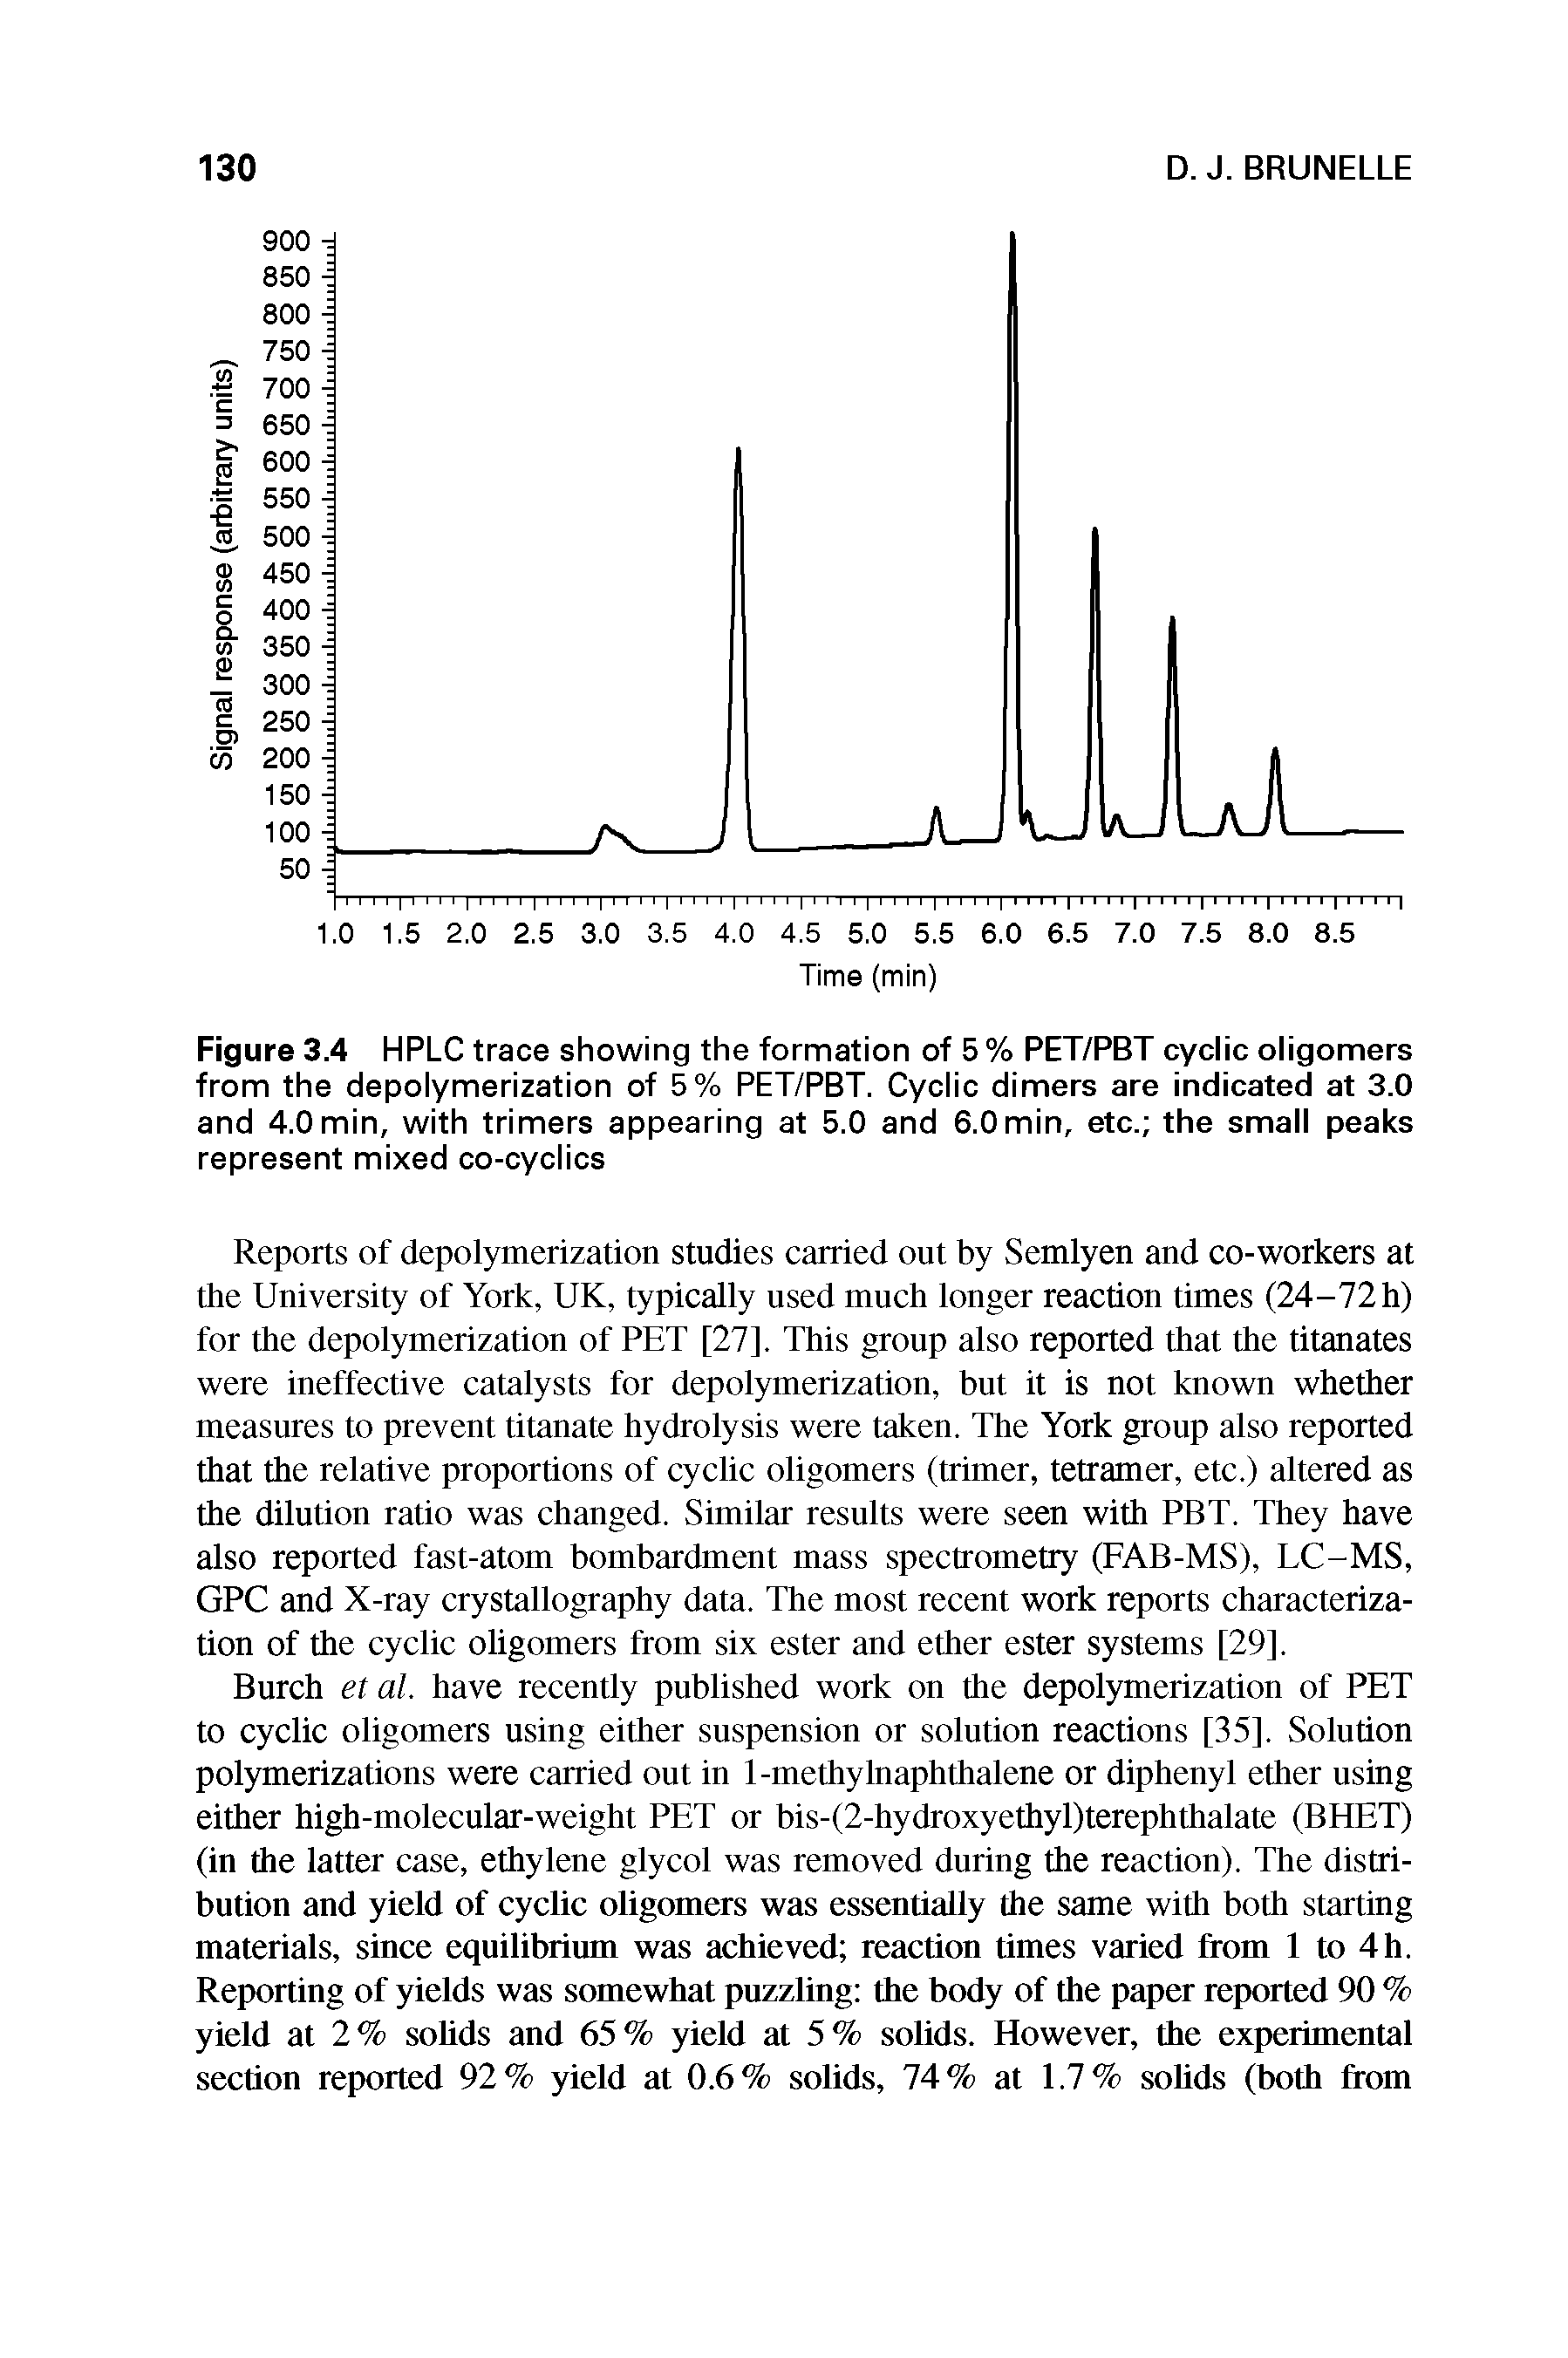 Figure 3.4 HPLC trace showing the formation of 5 % PET/PBT cyclic oligomers from the depolymerization of 5% PET/PBT. Cyclic dimers are indicated at 3.0 and 4.0 min, with trimers appearing at 5.0 and 6.0min, etc. the small peaks represent mixed co-cyclics...